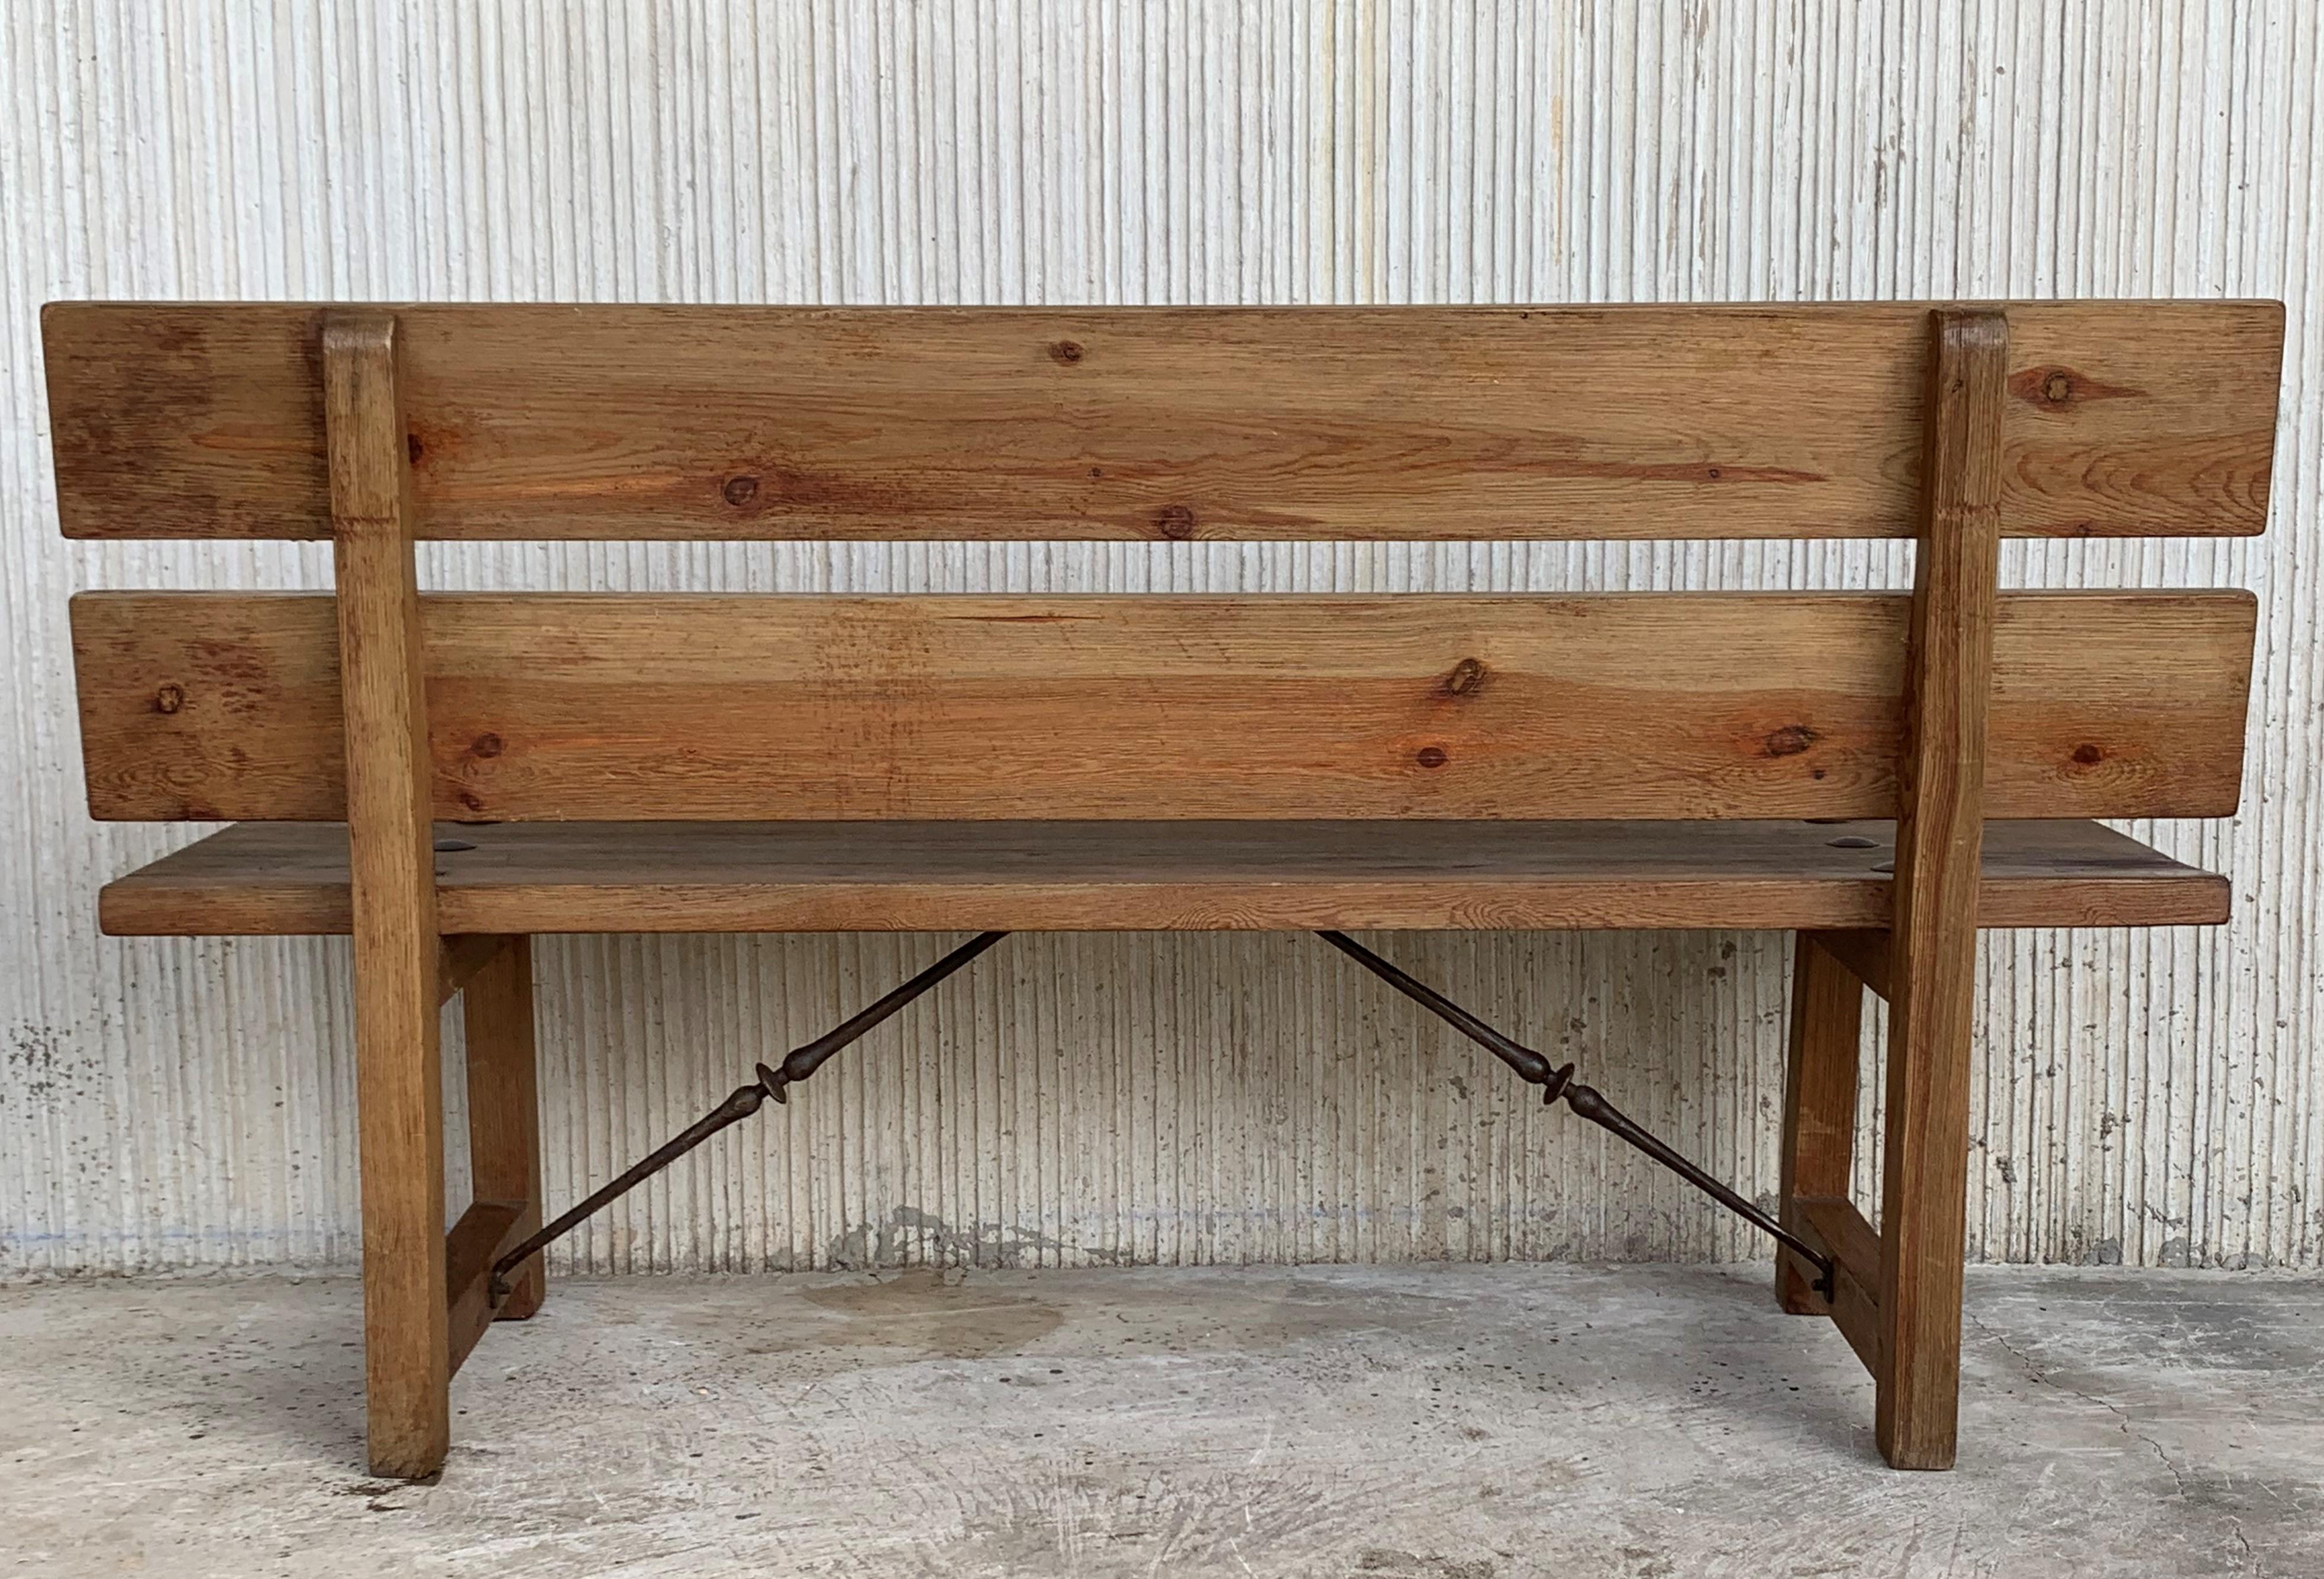 20th Century 20th Spanish Park or Garden Bench with Wood Slabs & Iron Stretcher